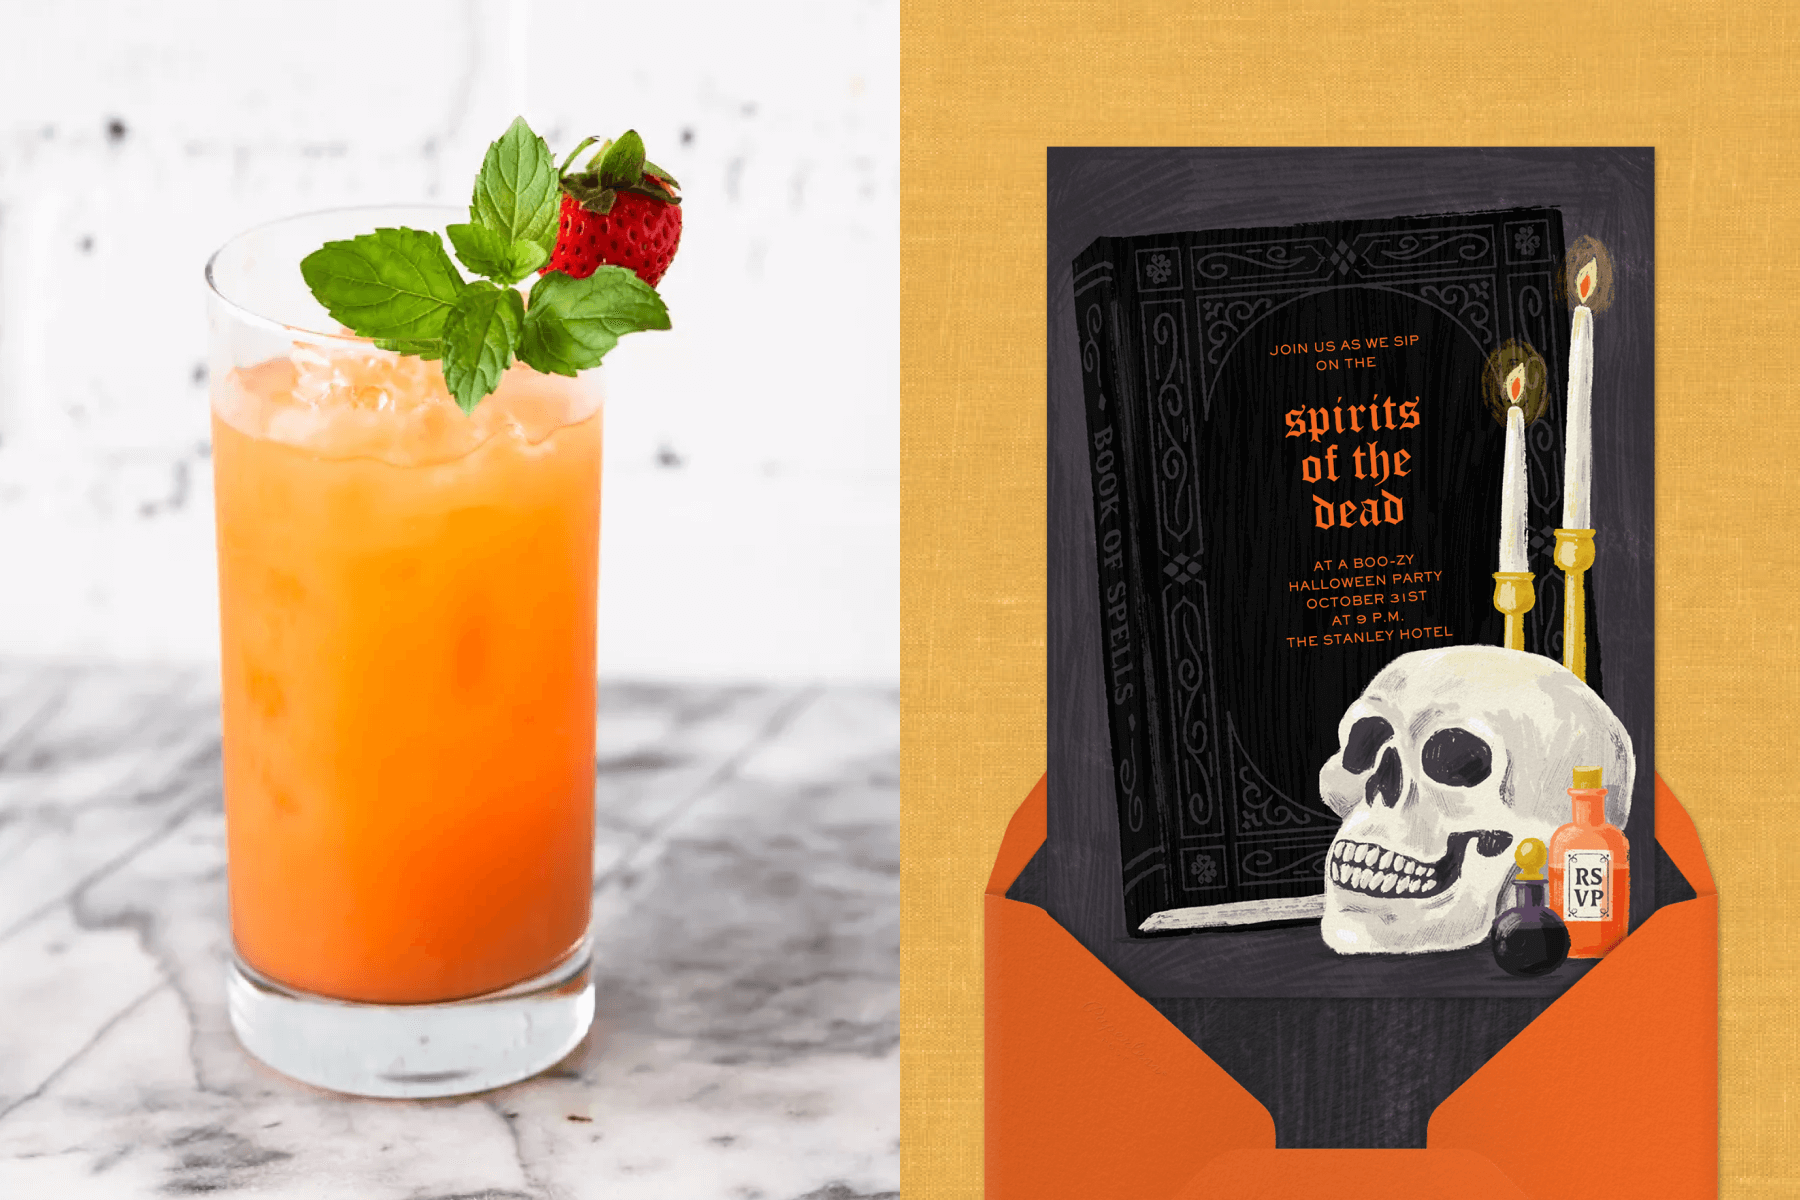 Left: A zombie cocktail with a strawberry garnish; Right: A black Halloween invitation with an illustration of a book of the dead, a skull, and candles.